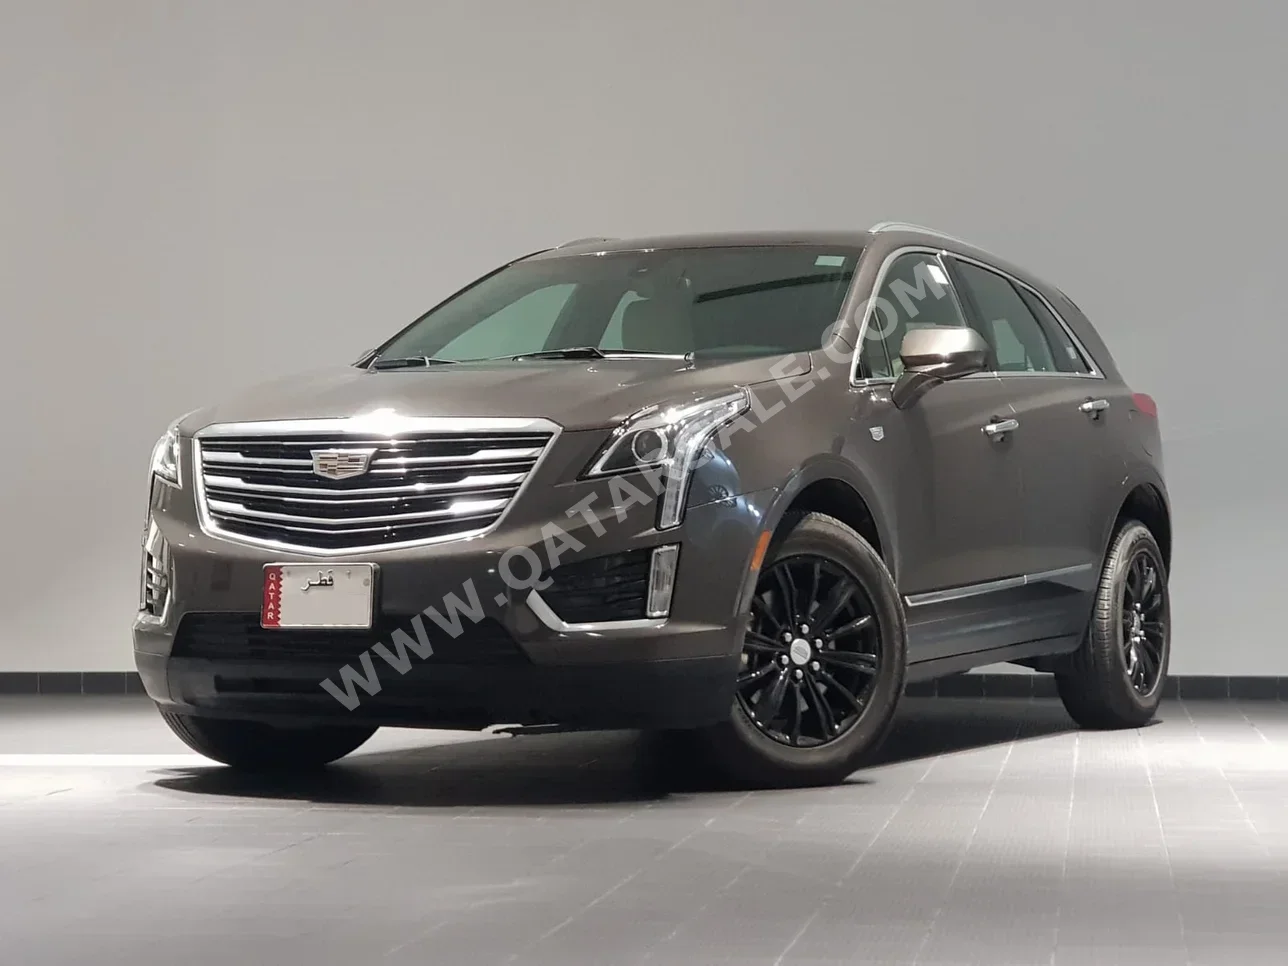 Cadillac  XT5  2019  Automatic  71,500 Km  6 Cylinder  Four Wheel Drive (4WD)  SUV  Brown